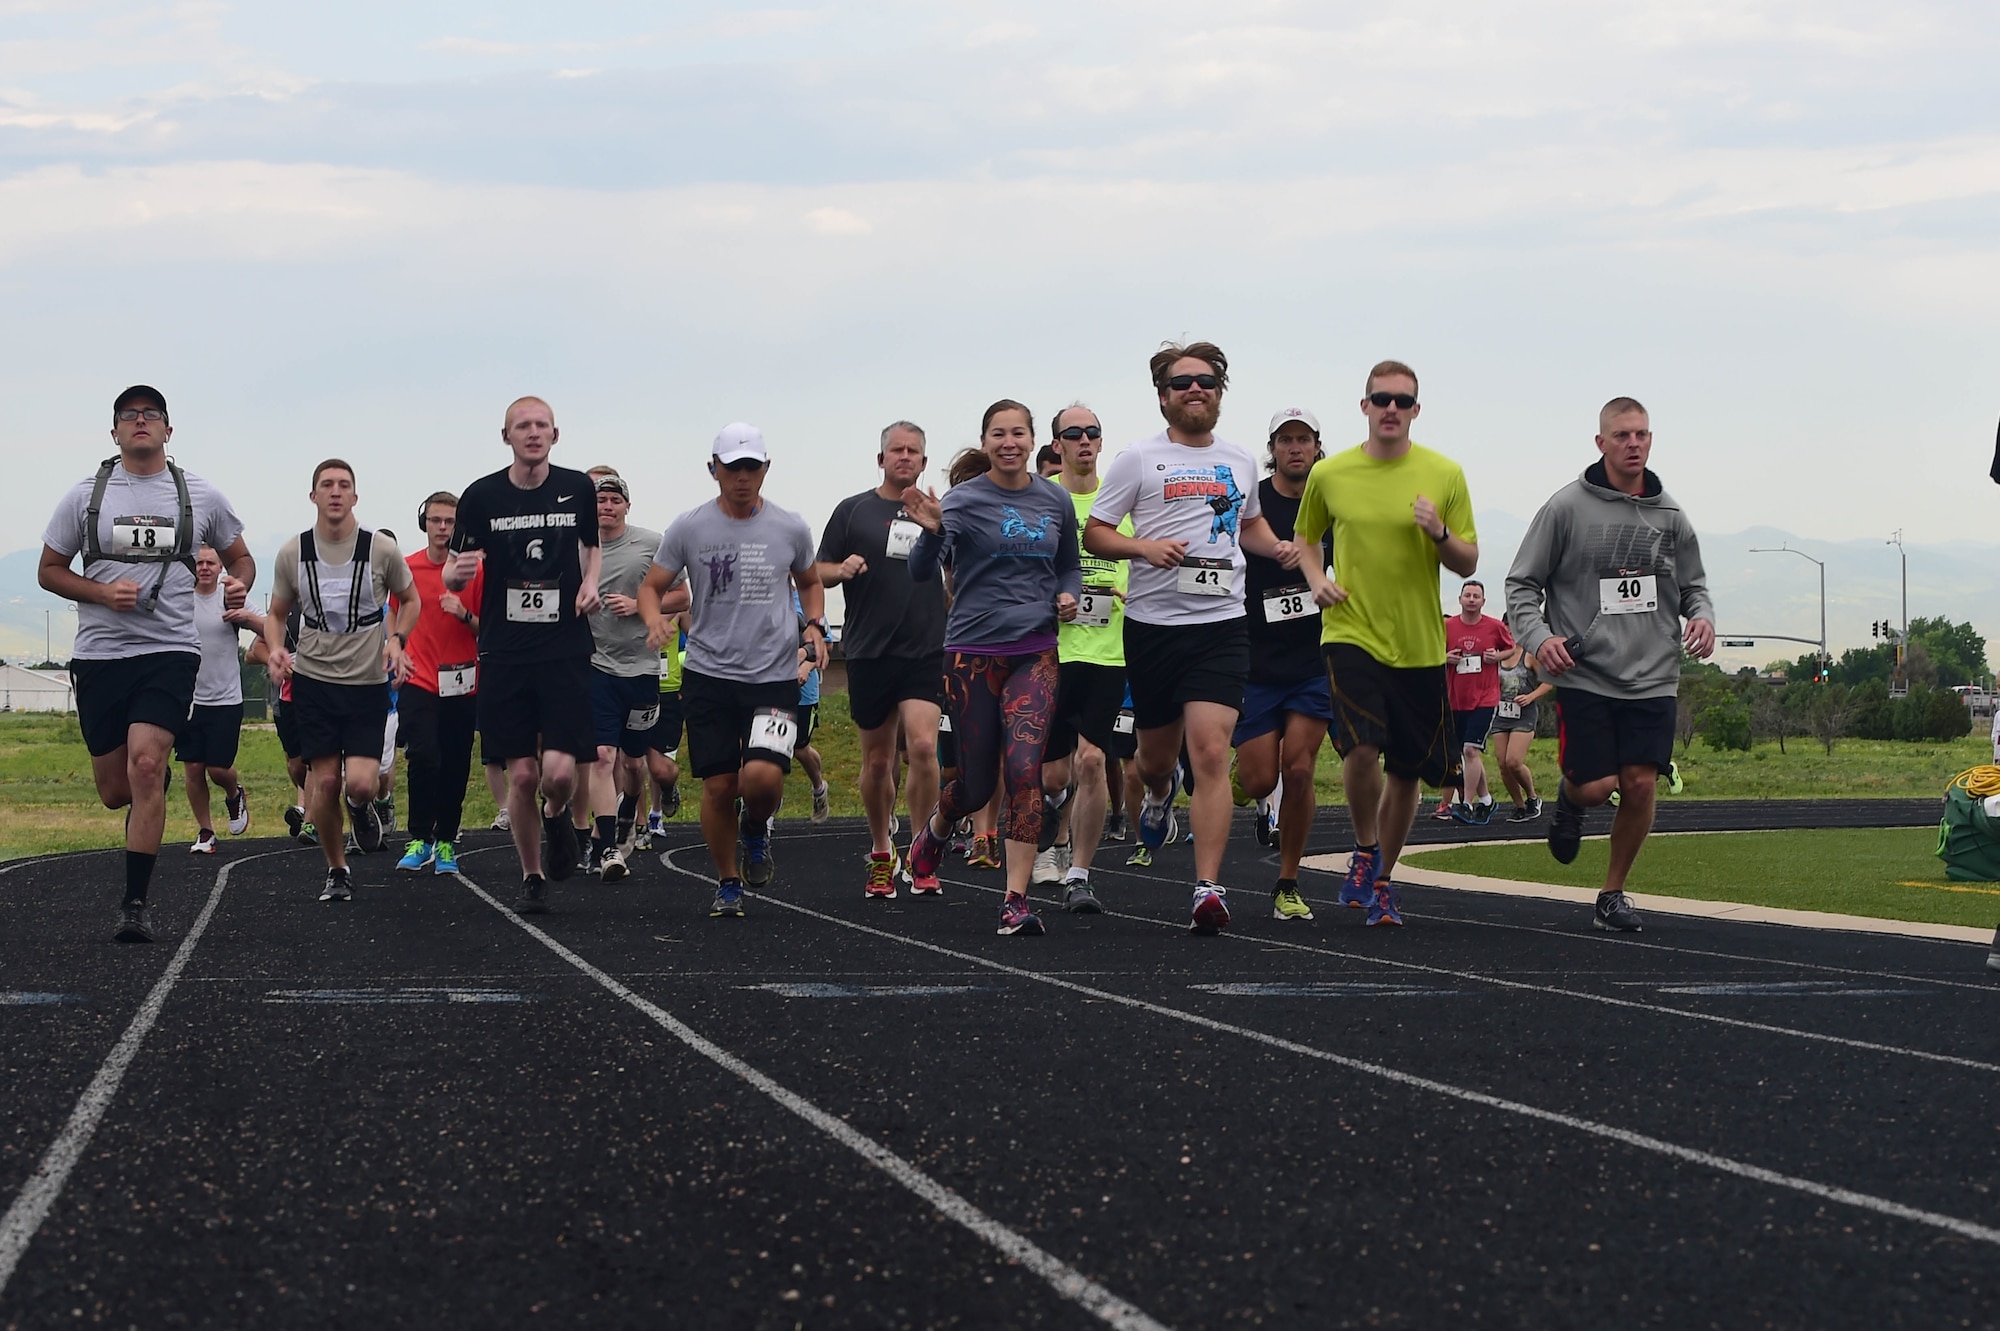 Team Buckley members embark on a 12k run as part of the Dash to Distance series June 25, 2015, at the all-purpose field on Buckley Air Force Base, Colo. The Dash to Distance series started with a 5k and will gradually build up to a half-marathon run. Prizes were awarded to the top male and female finishers, along with Commander’s Cup points. (U.S. Air Force photo by Airman 1st Class Luke W. Nowakowski/Released)